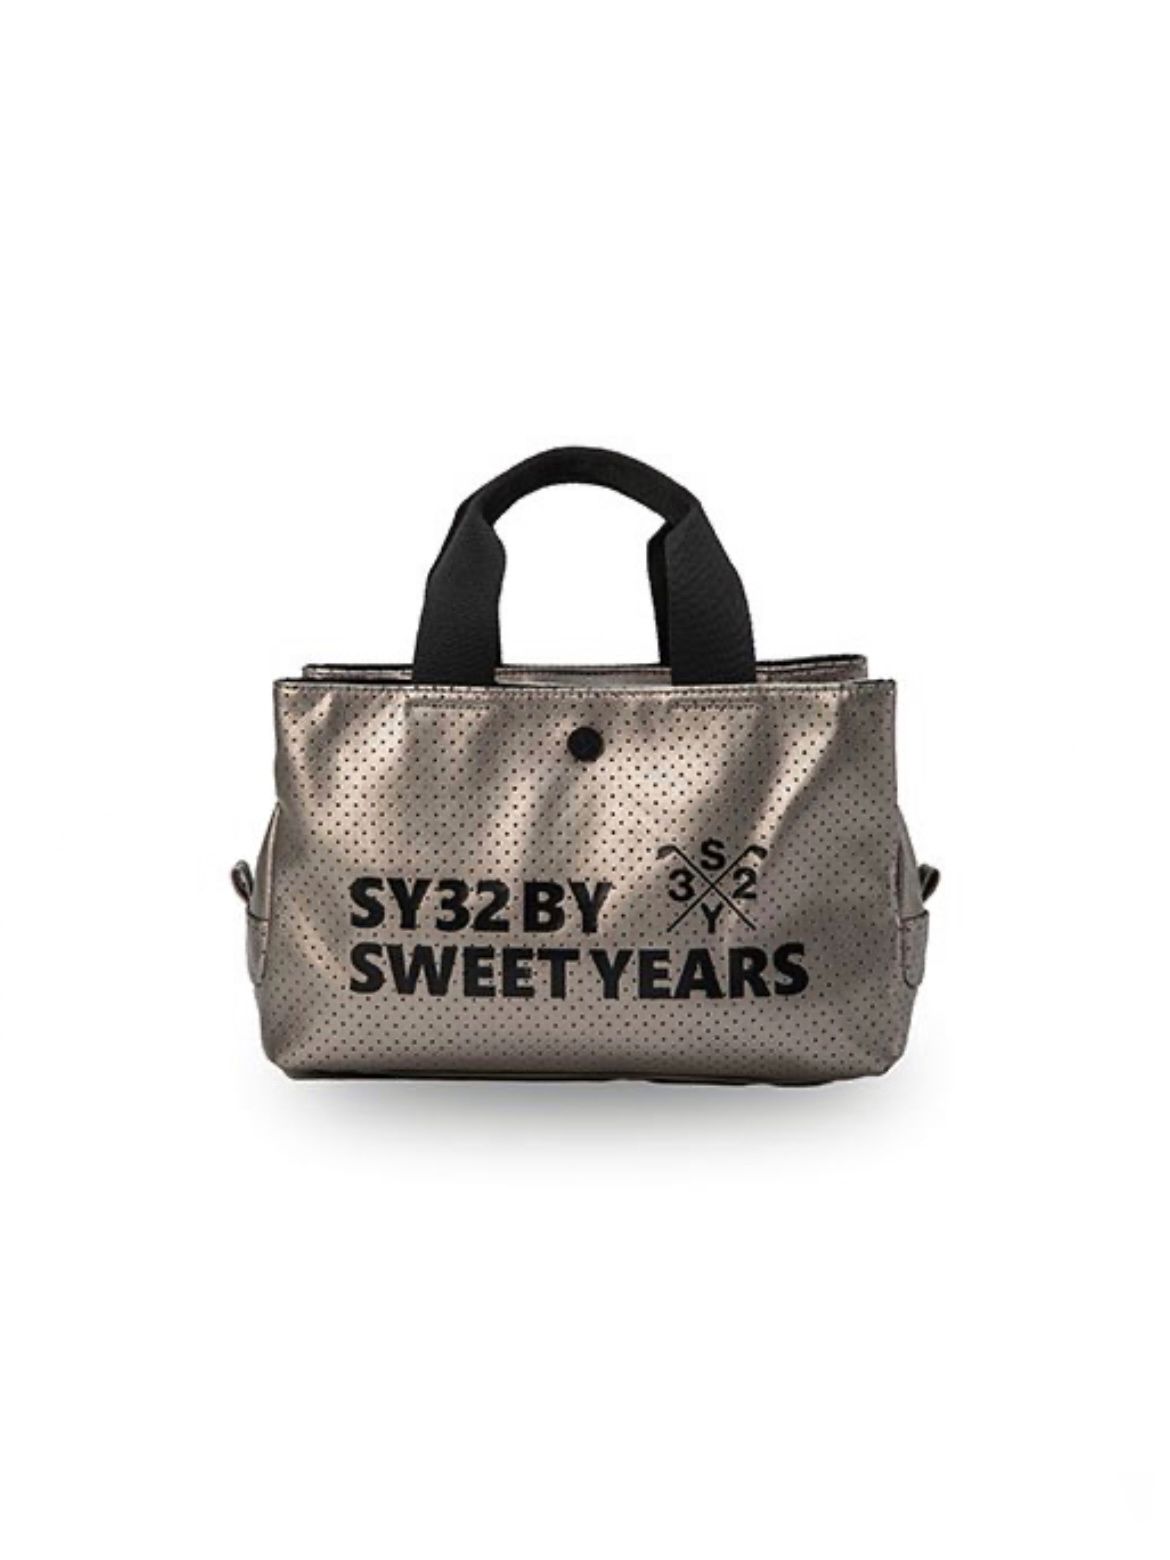 SY32 by SWEET YEARS GOLF - 【23SS】カート バッグ / CART BAG